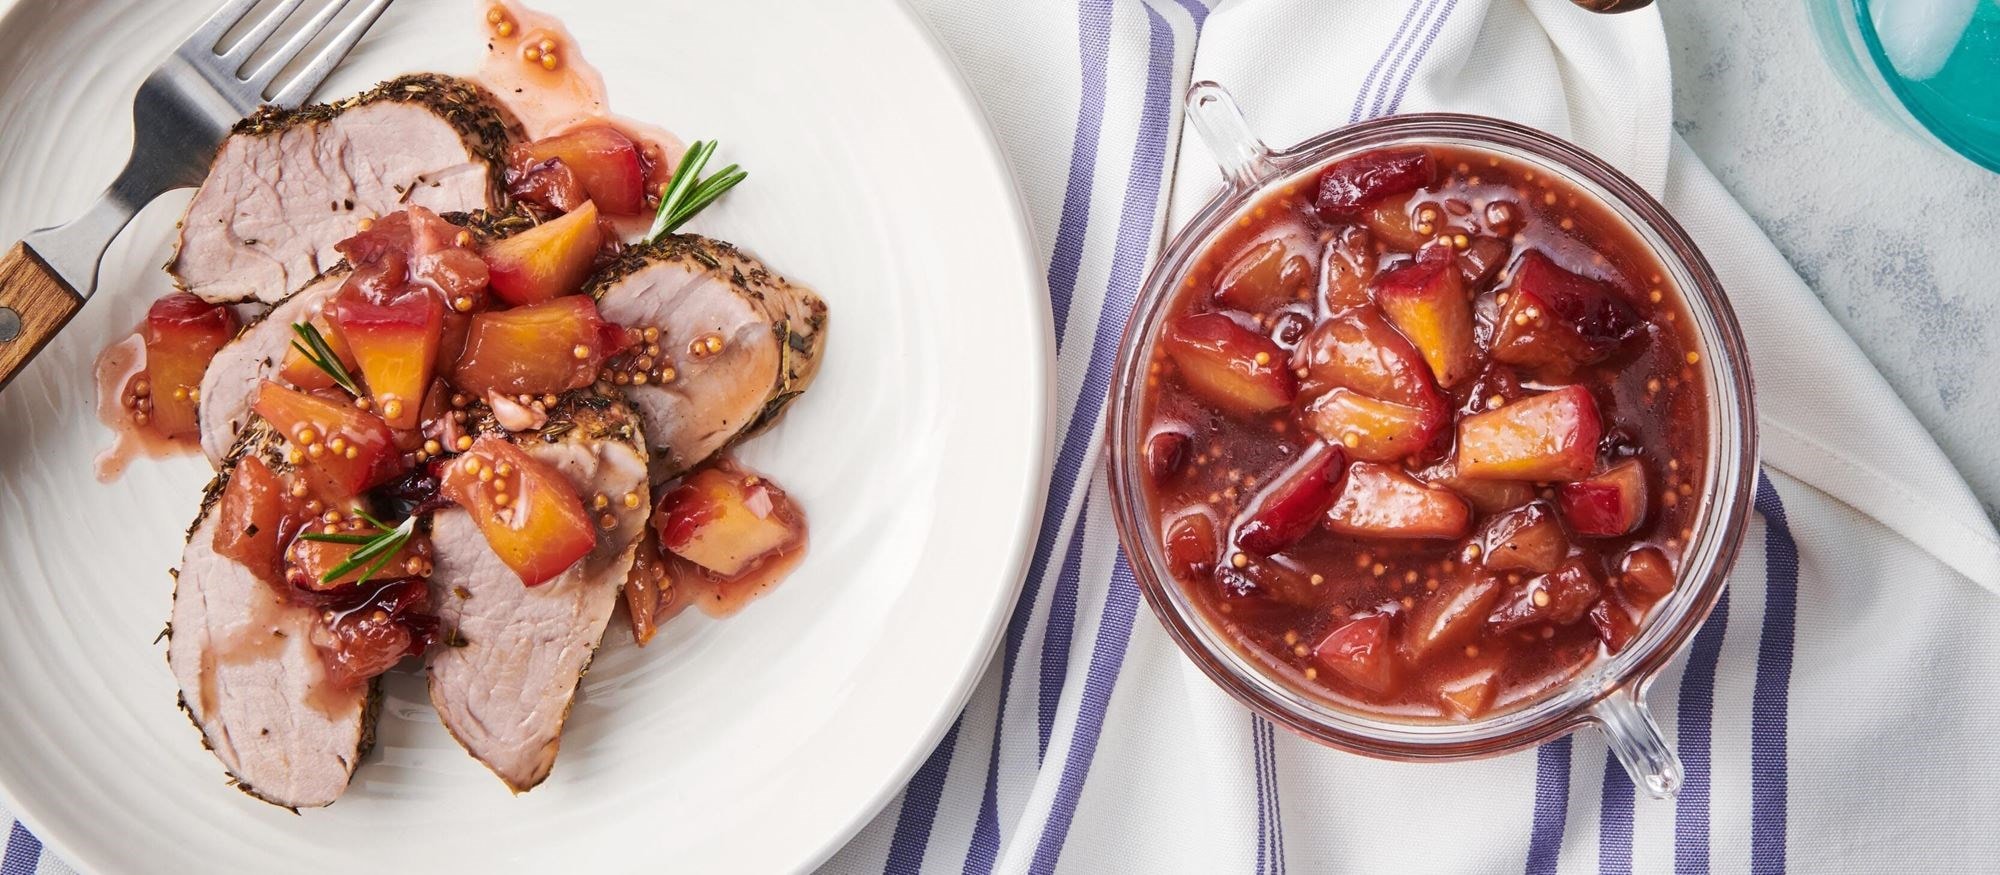 Easy and delicious Pork Tenderloin with Plum Chutney  recipe using the Convection Roast Mode setting of your Wolf Oven